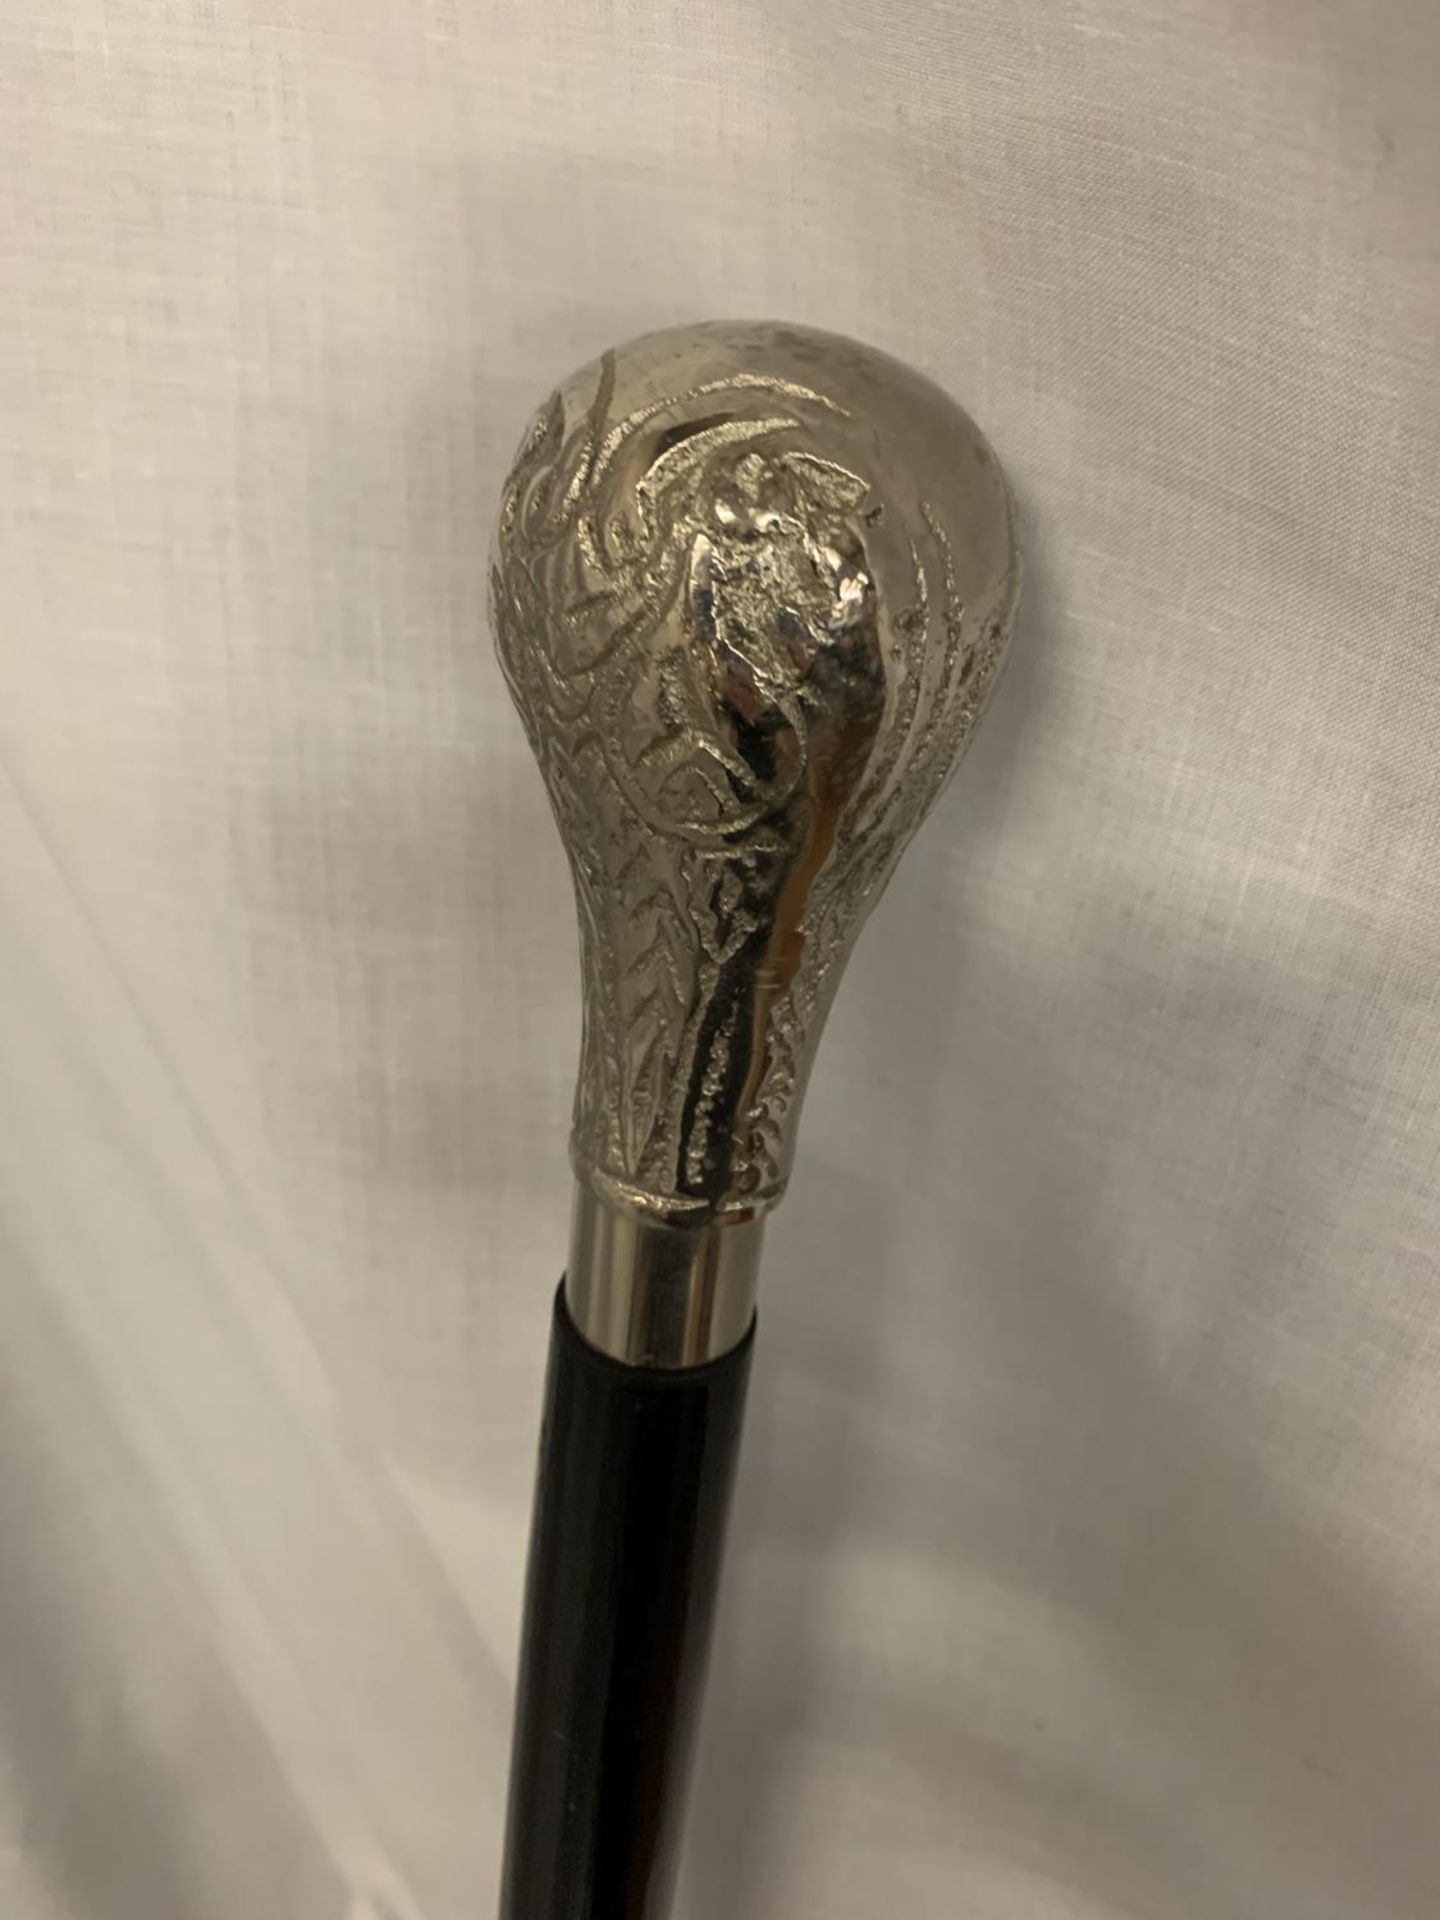 A BLACK WALKING CANE WITH WHITE METAL HANDLE - Image 2 of 3